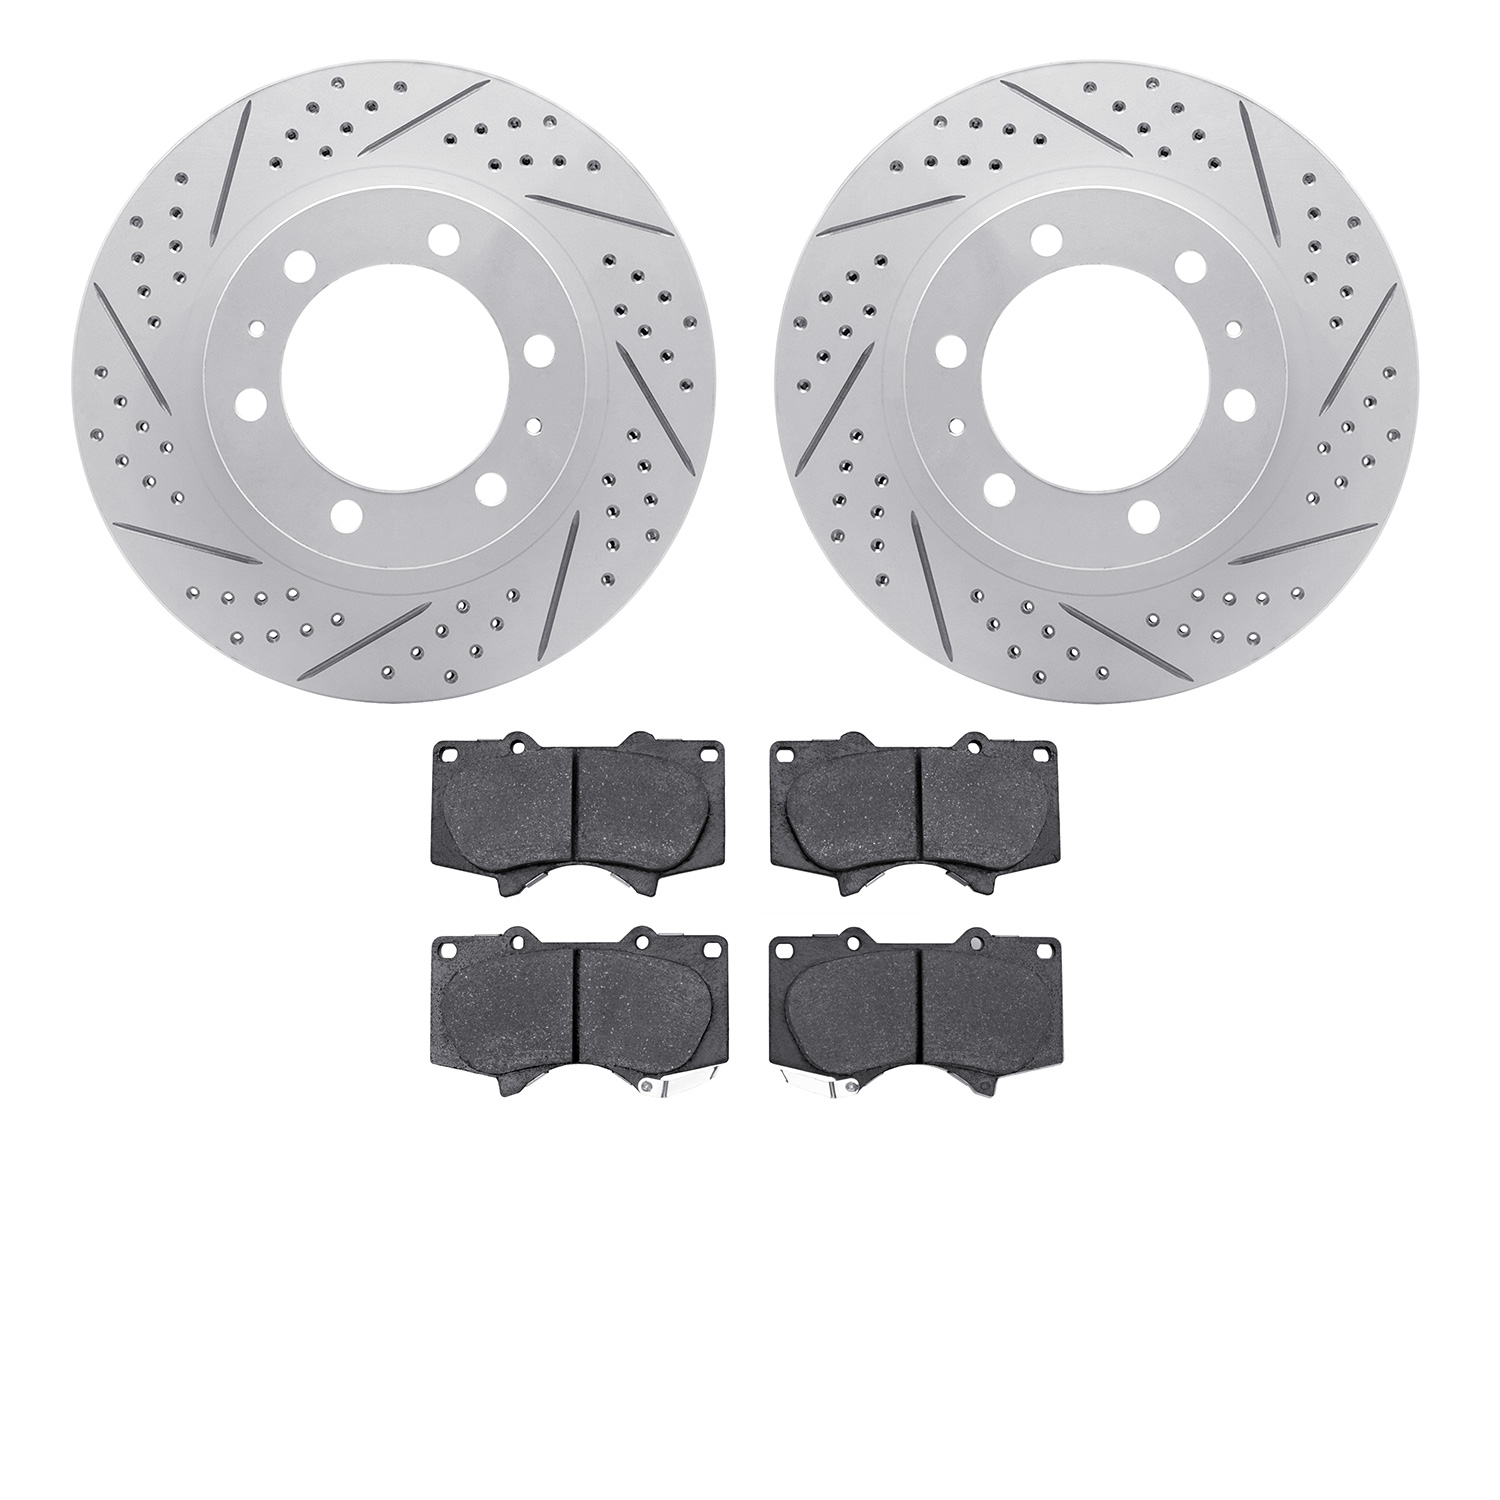 2202-76004 Geoperformance Drilled/Slotted Rotors w/Heavy-Duty Pads Kit, Fits Select Lexus/Toyota/Scion, Position: Front